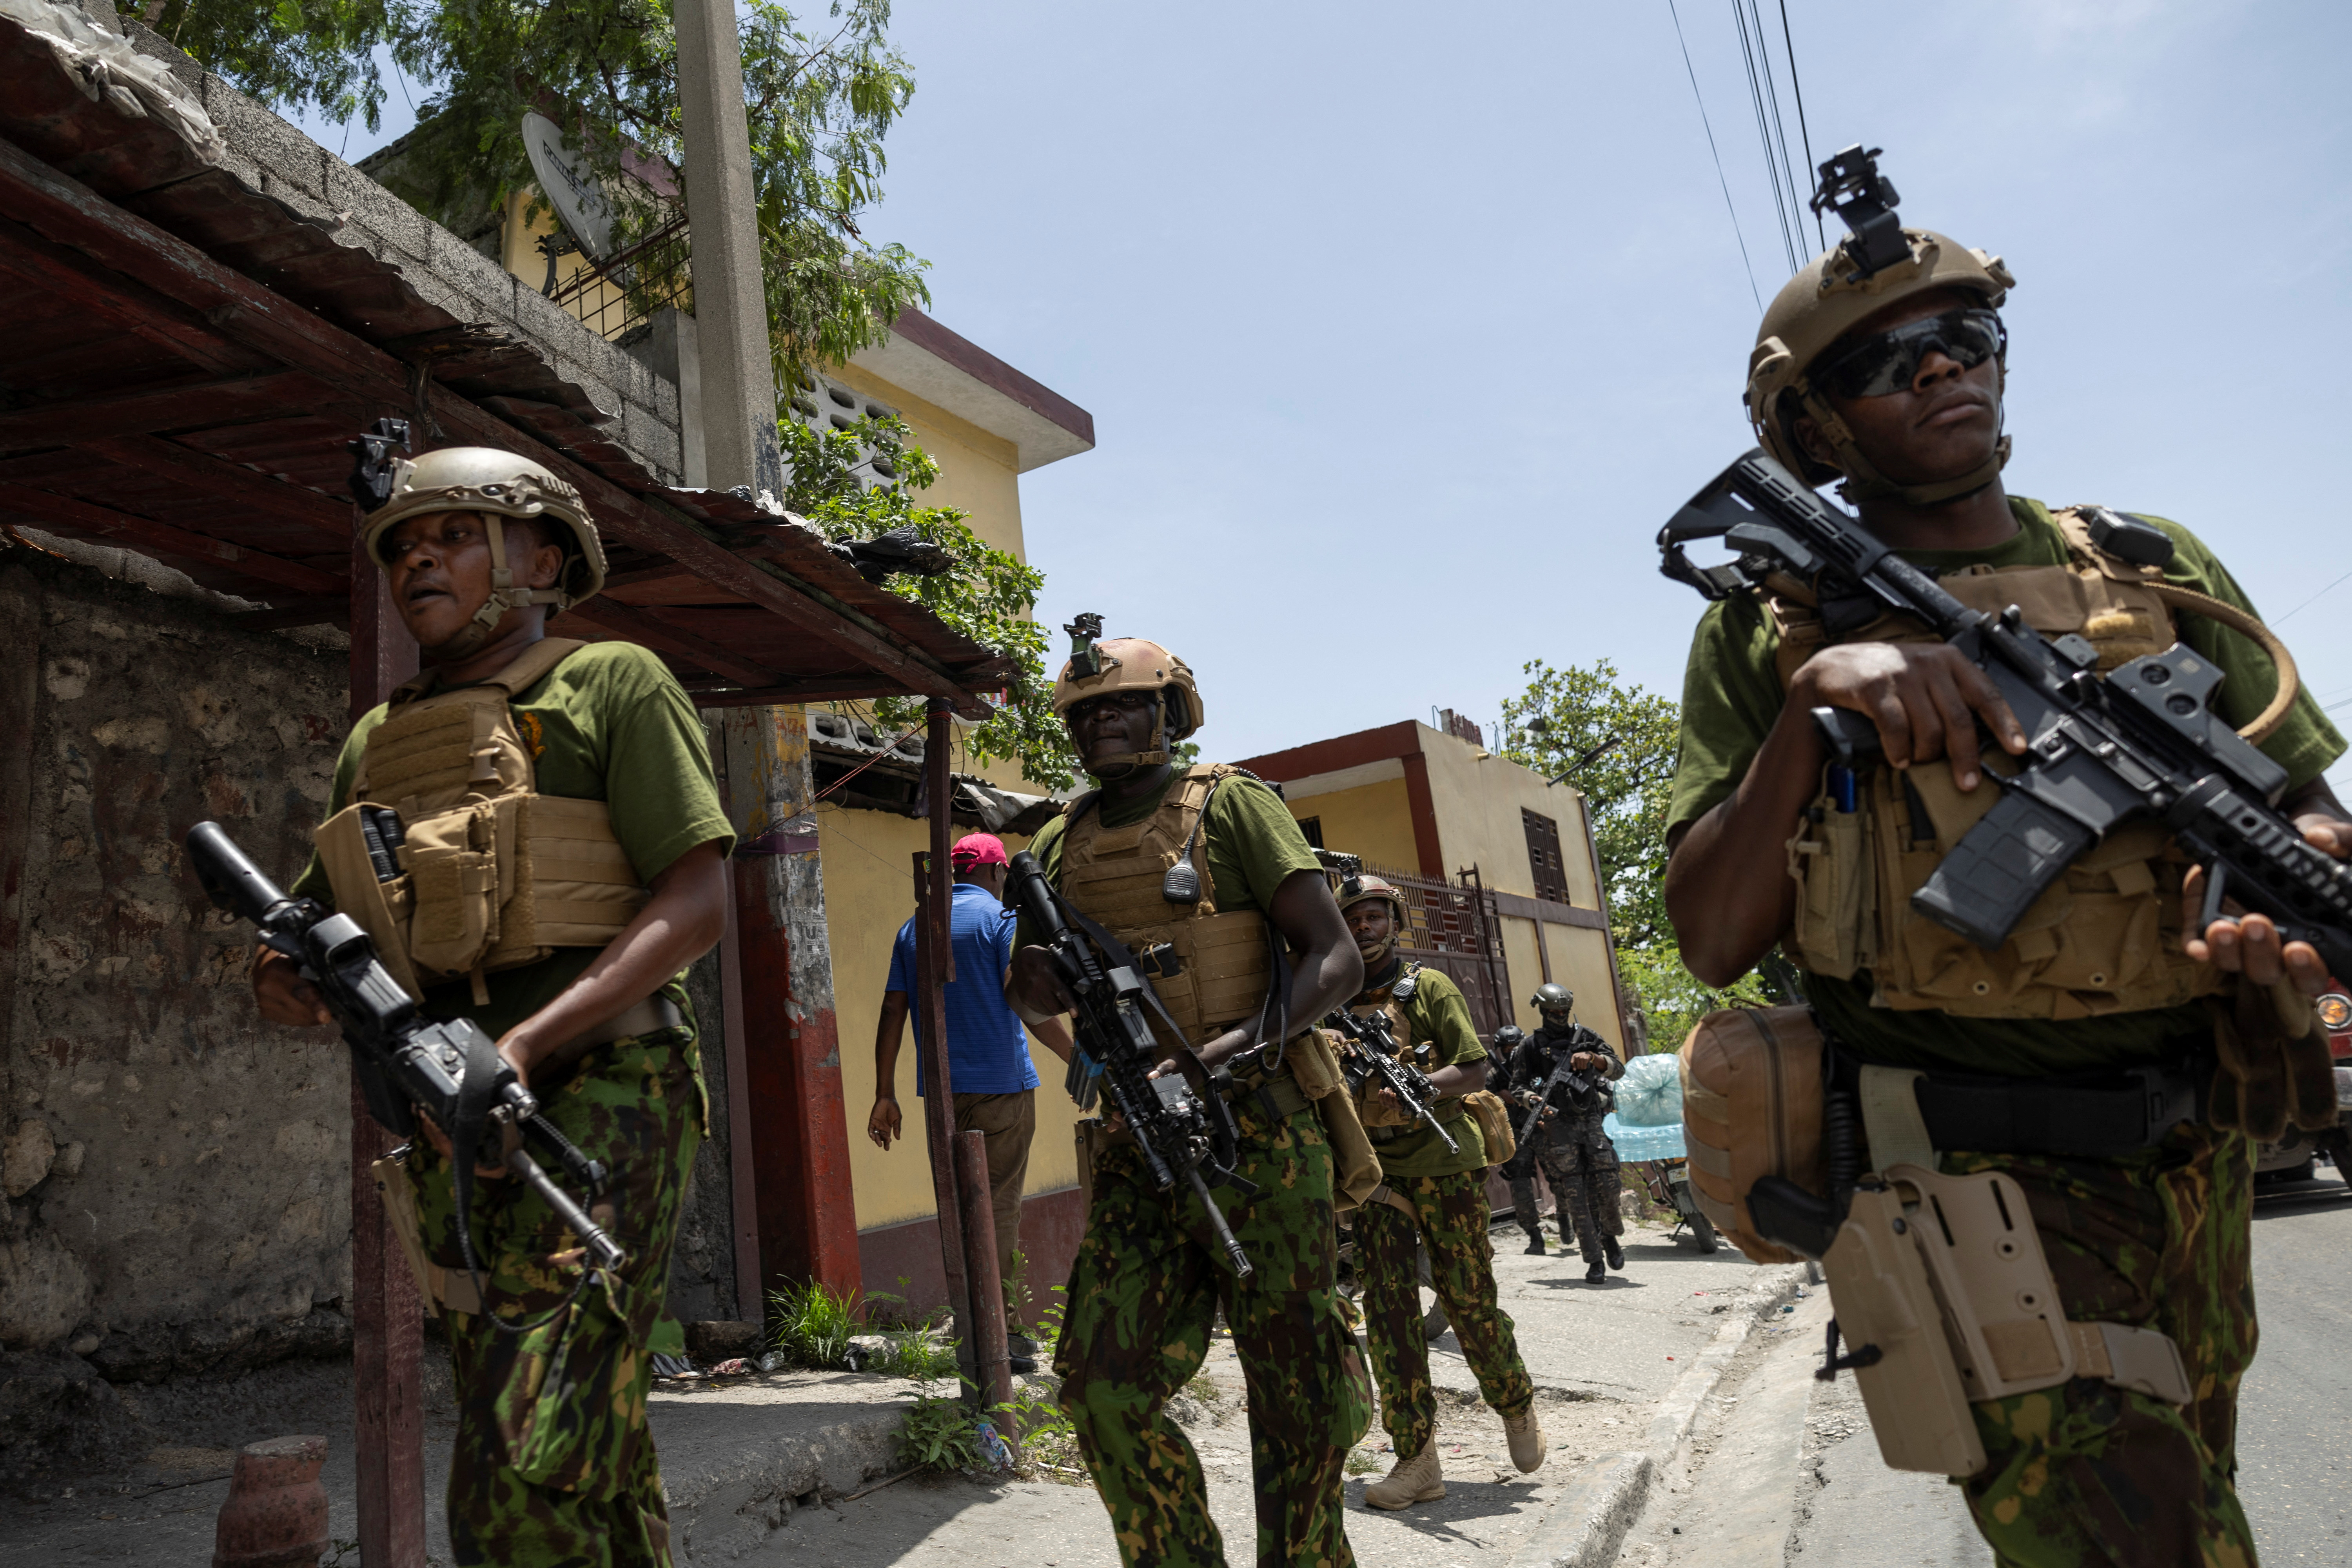 Kenyan police and Haitian National police SWAT units patrol streets in armoured vehicles, in Port-au-Prince